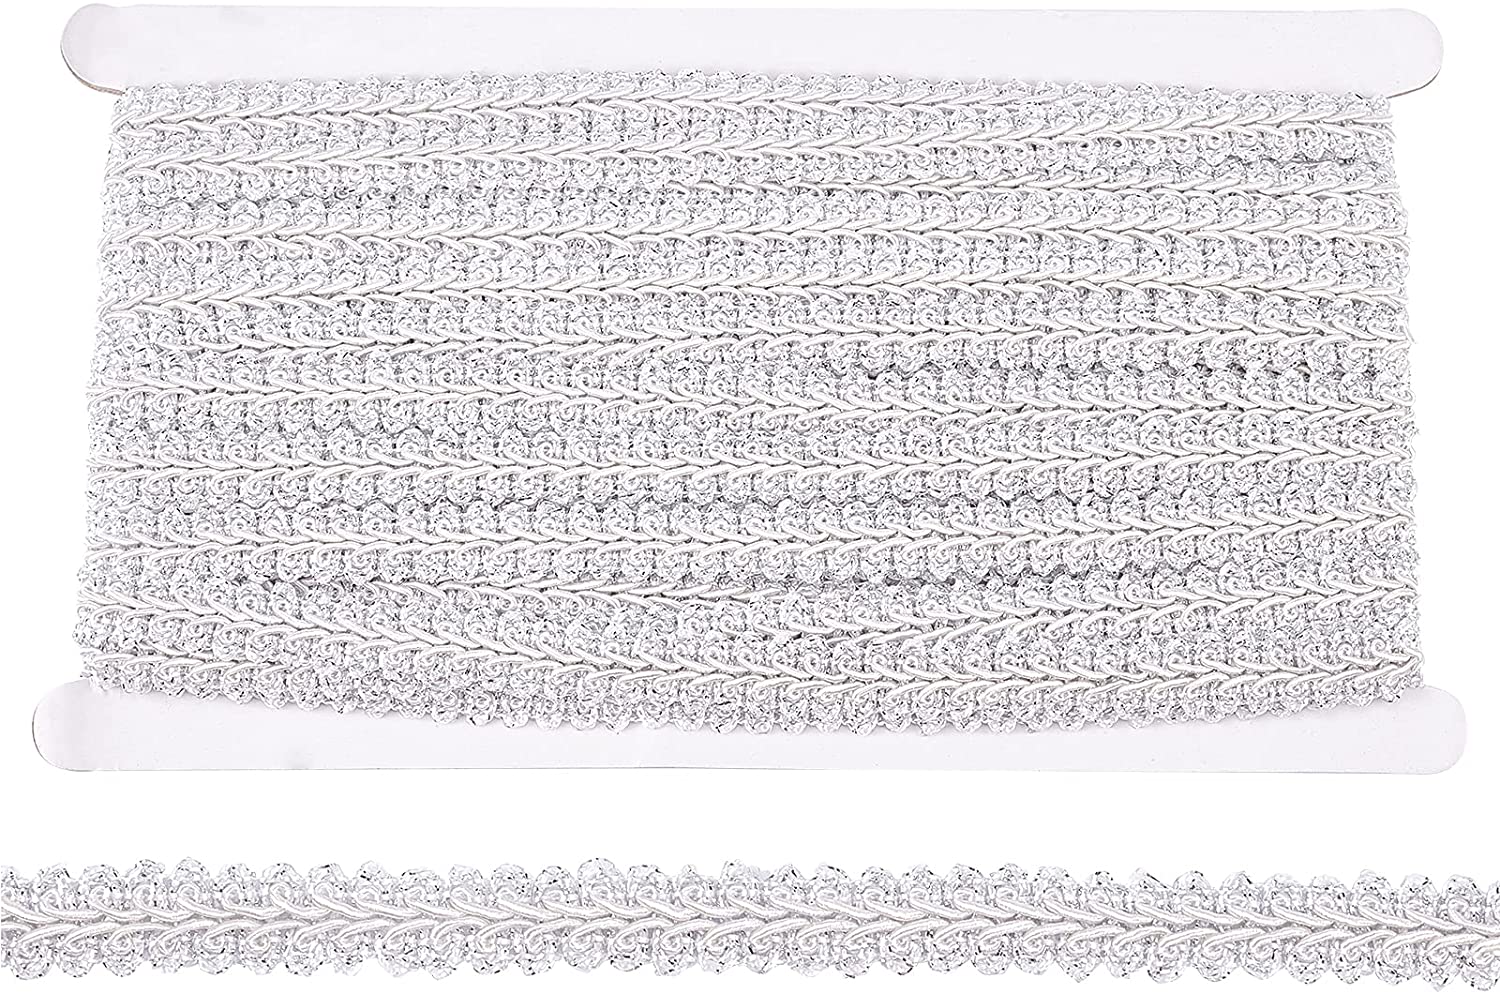 0.47Inch 38.98FT Silver Polyester Centipede Braid Lace Trimming Sewing Lace Ribbon for Costume DIY Crafts Sewing Jewelry Making